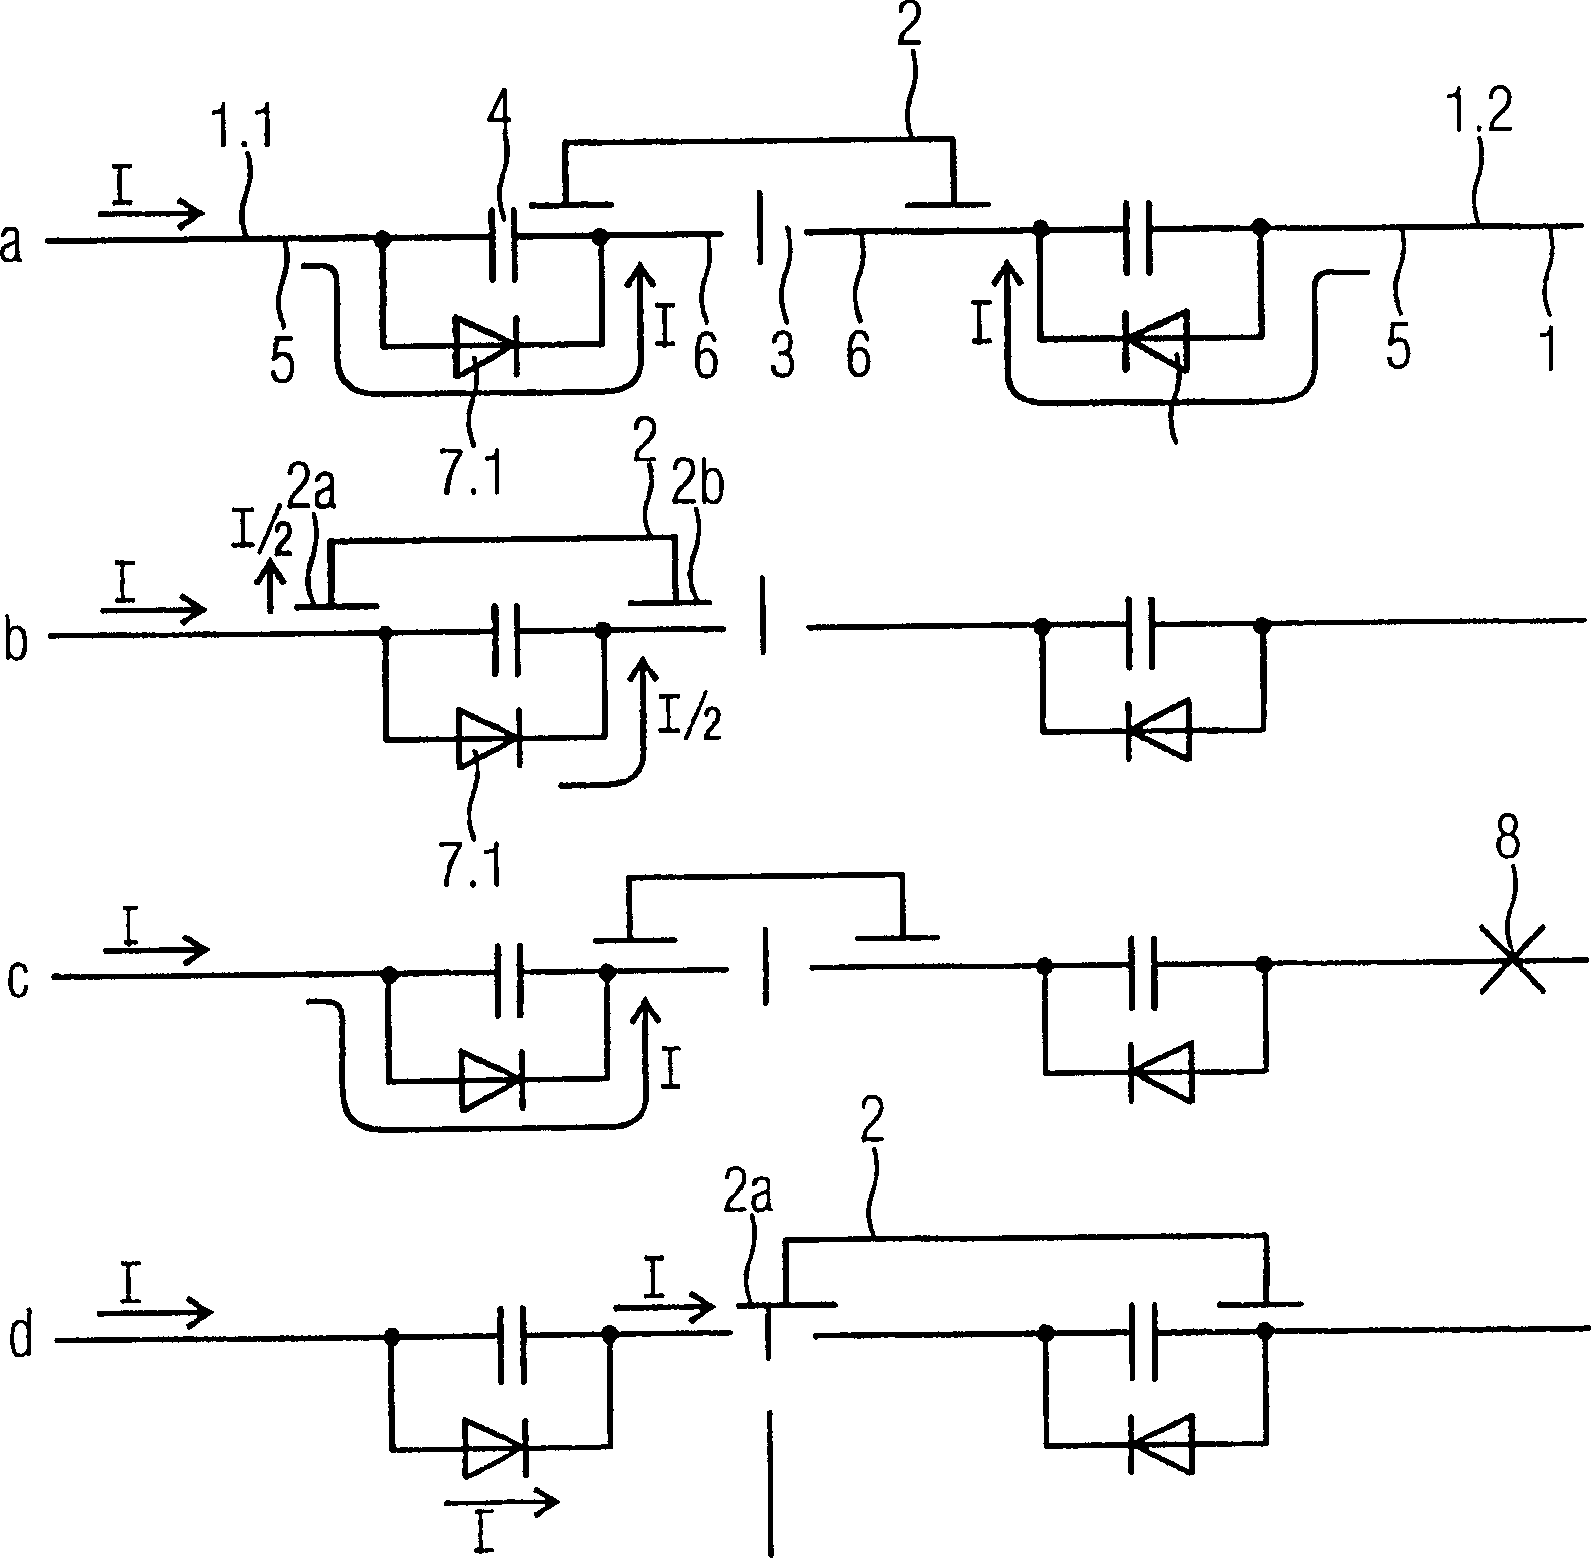 Power supply system based on bus/current collector